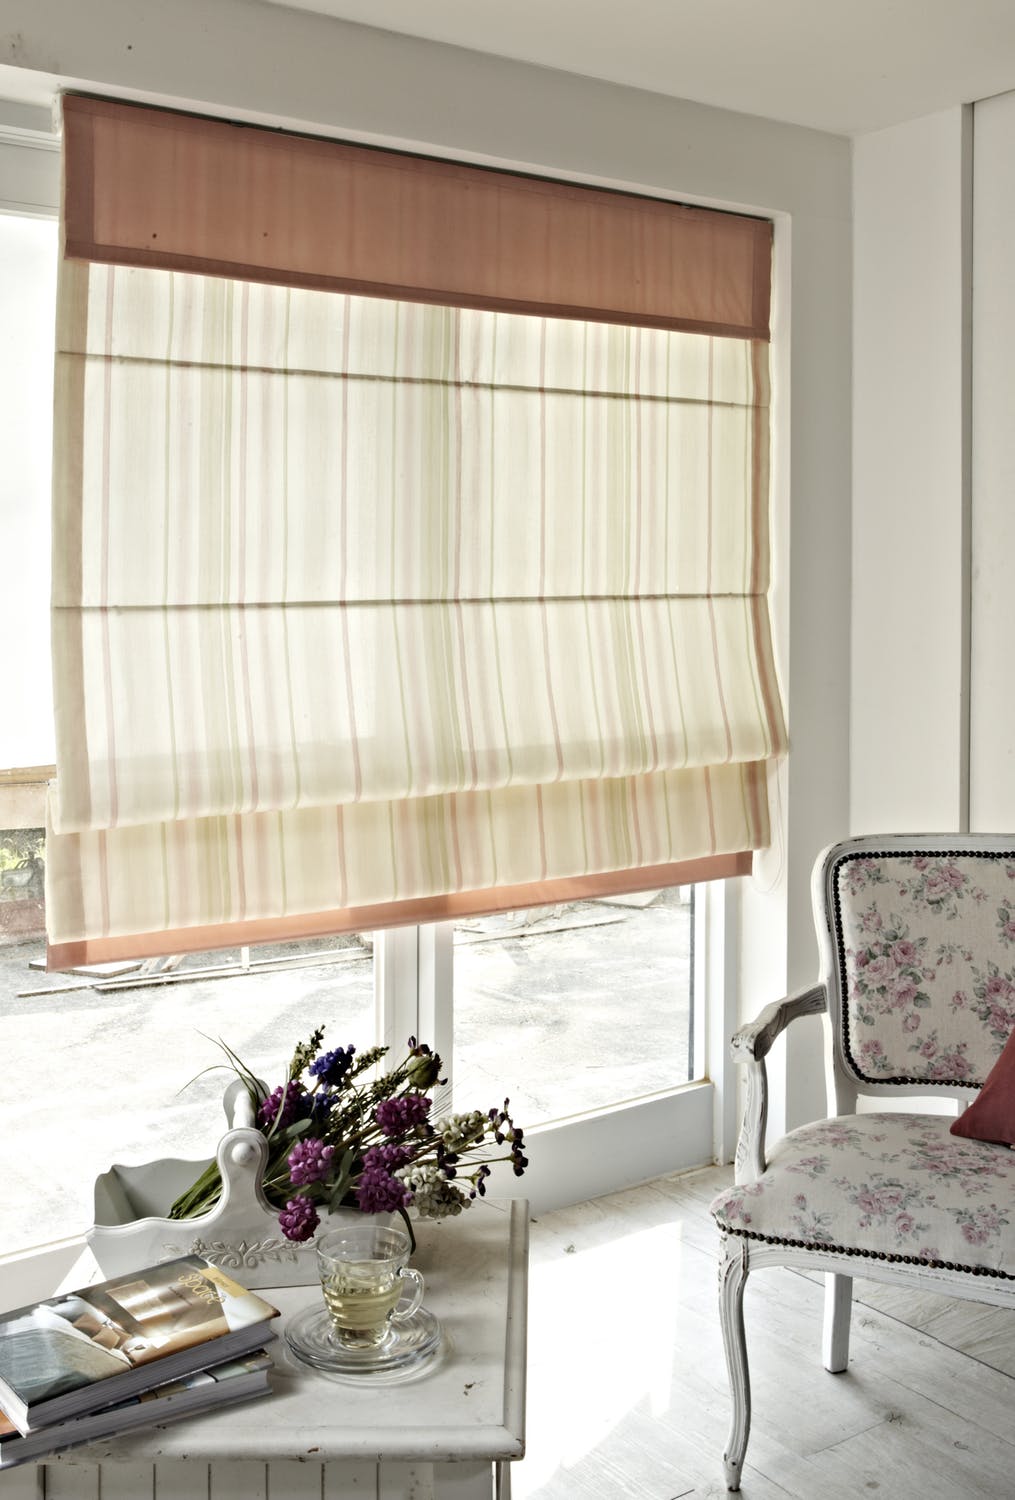 3 Things You Can Do To Buy Blinds on a Budget